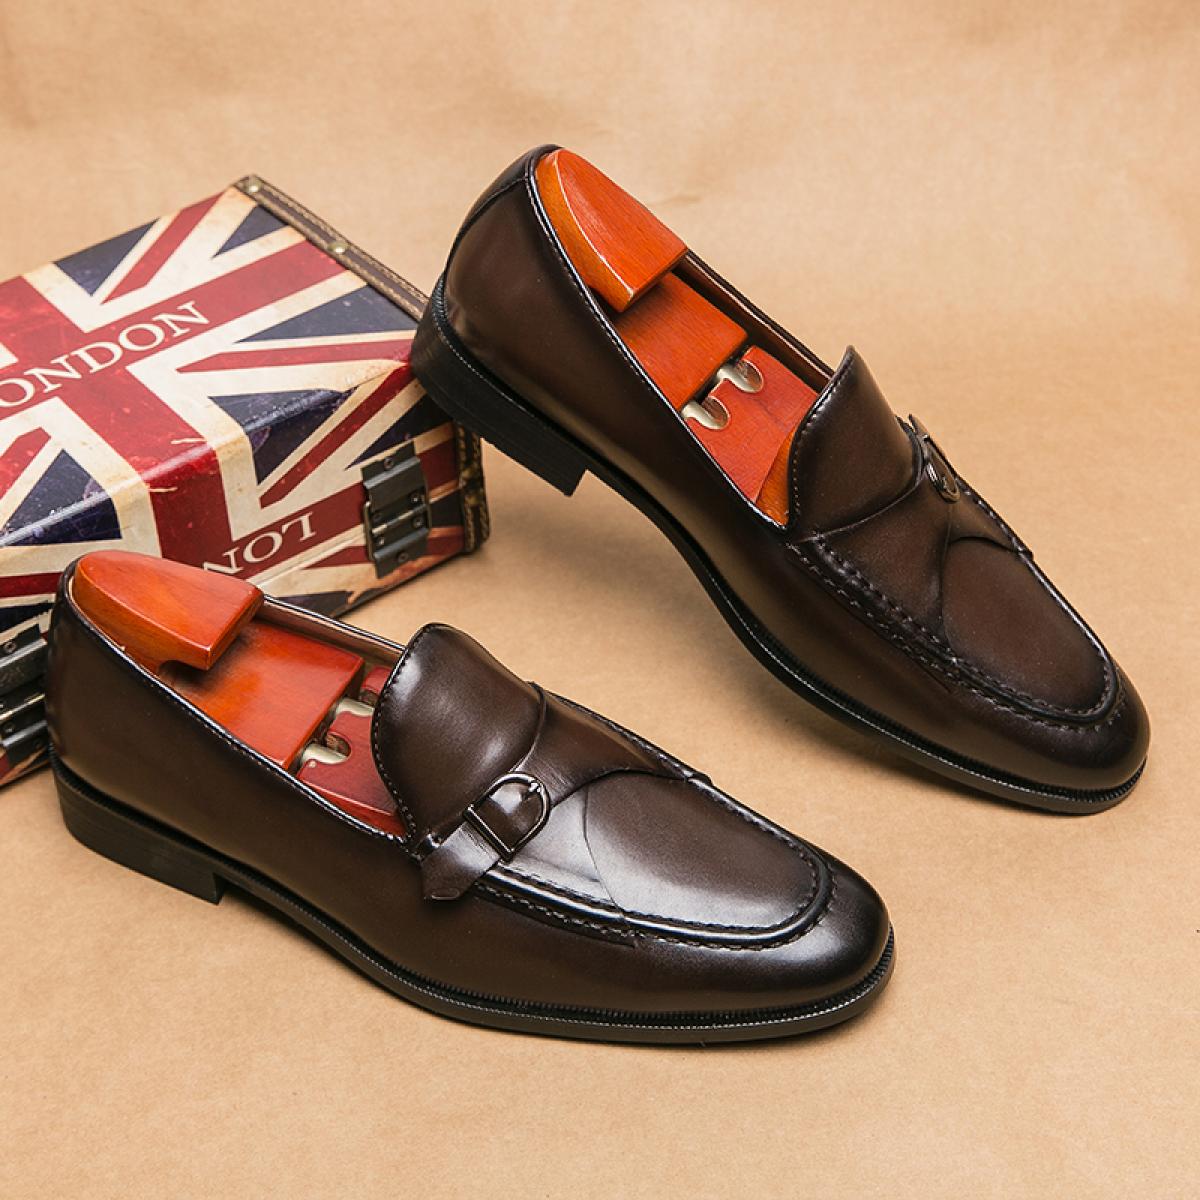 New Brown Loafers For Men Square Toe Slip On Mens Formal Shoes Business Handmade Size 38 46 Free Shipping